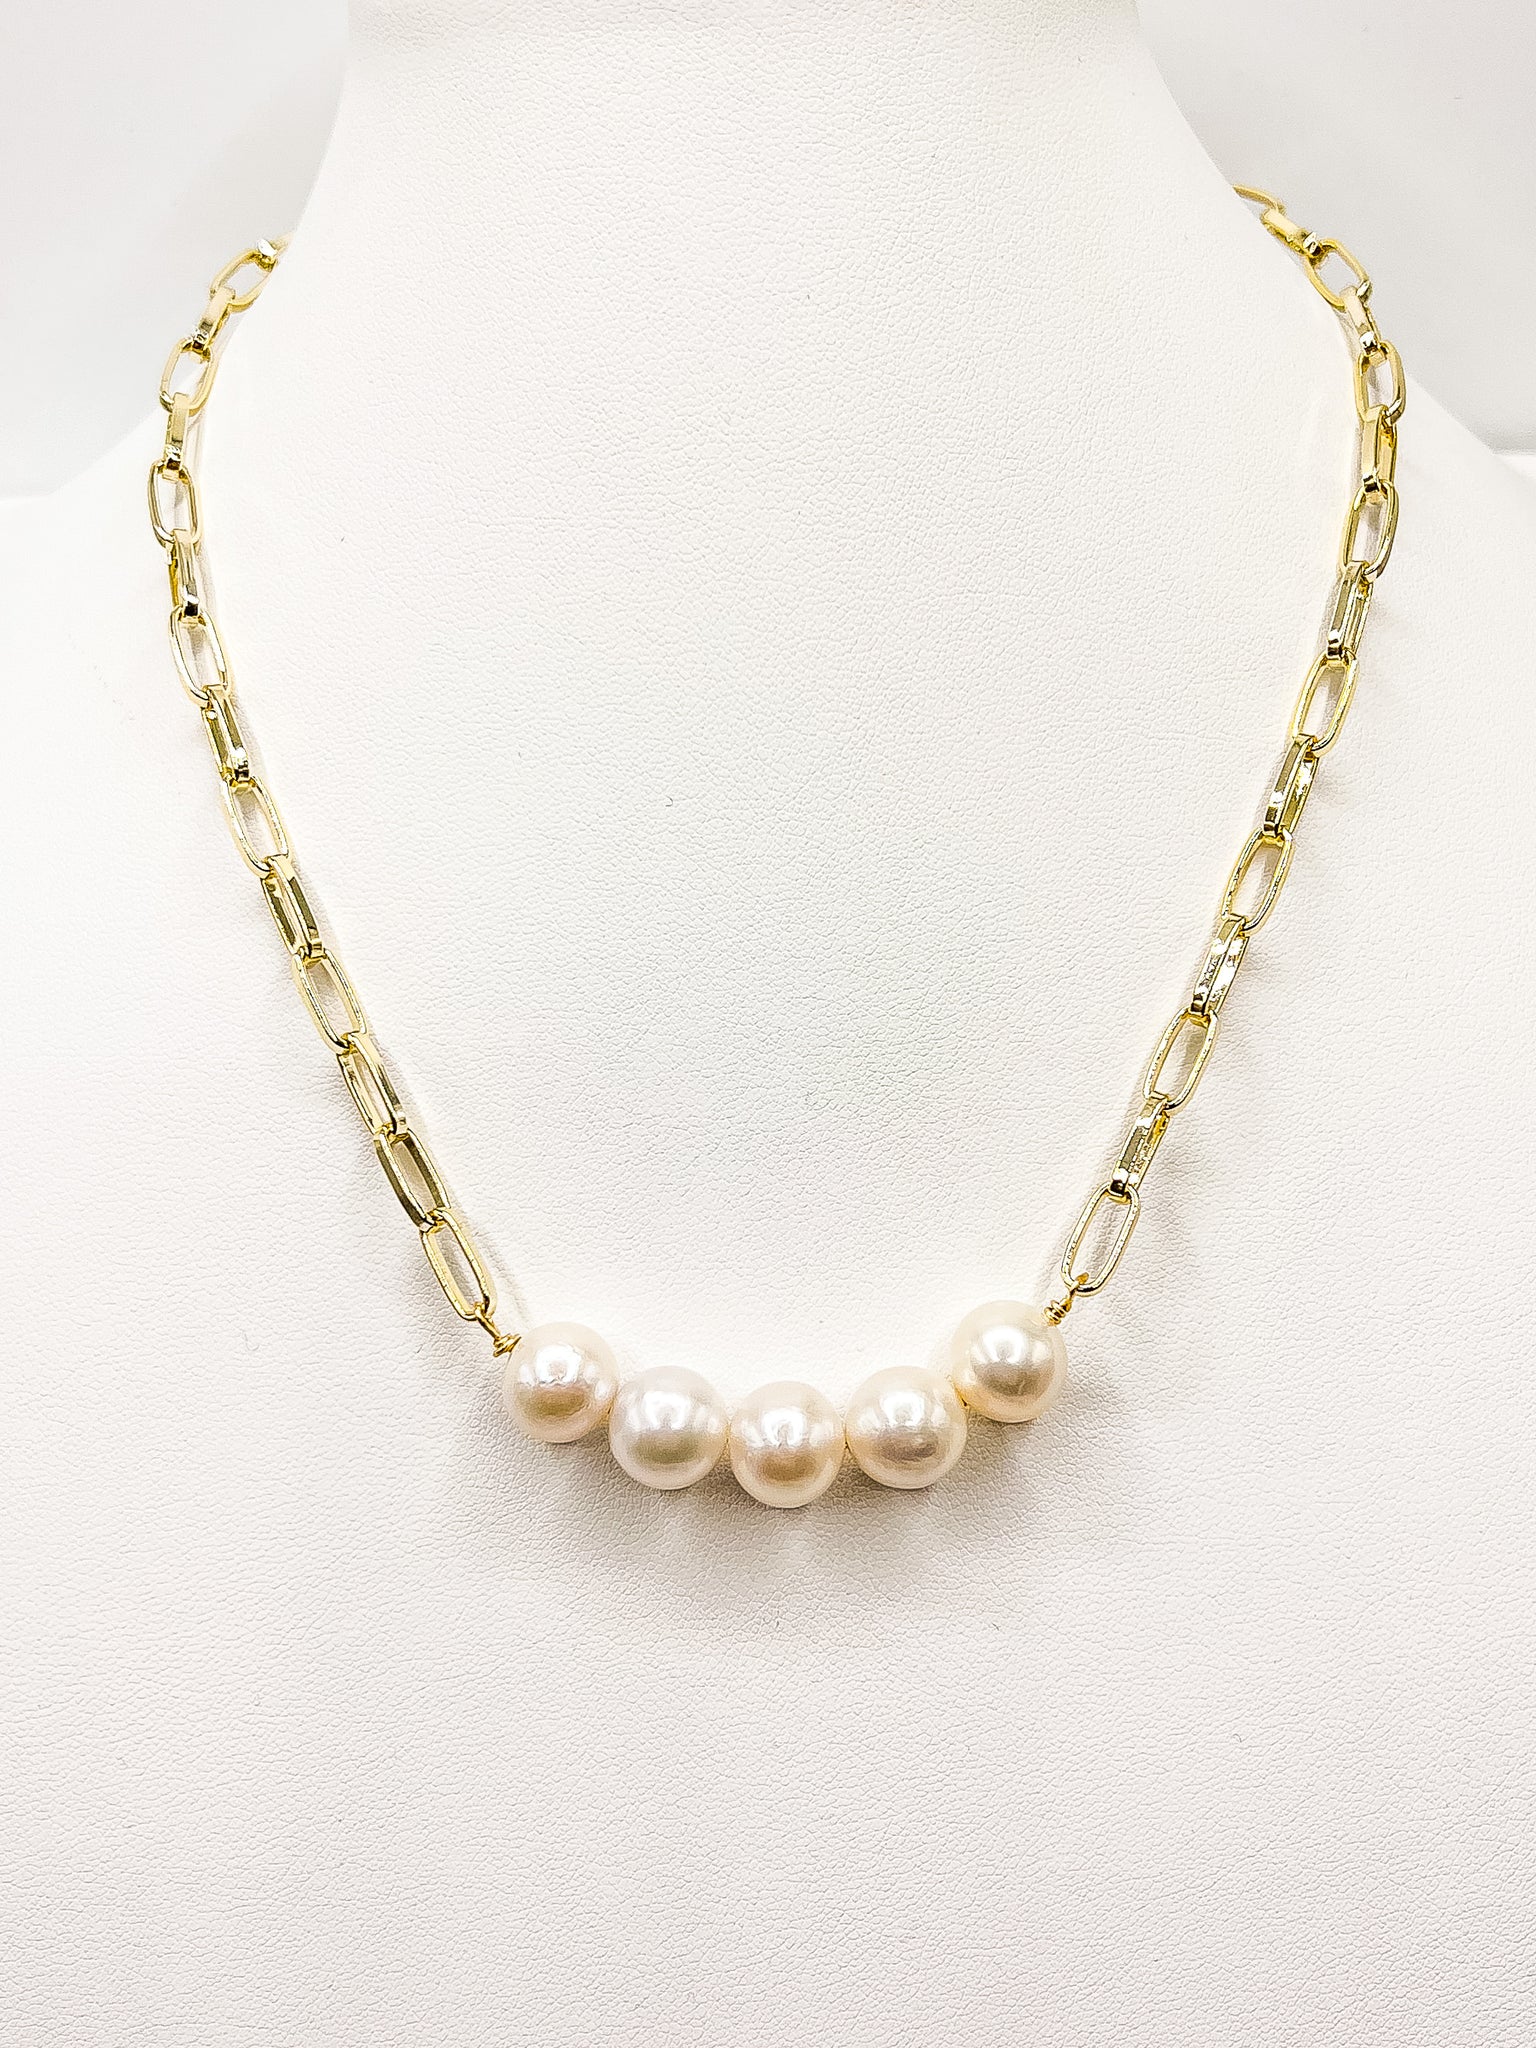 Five pearl necklace